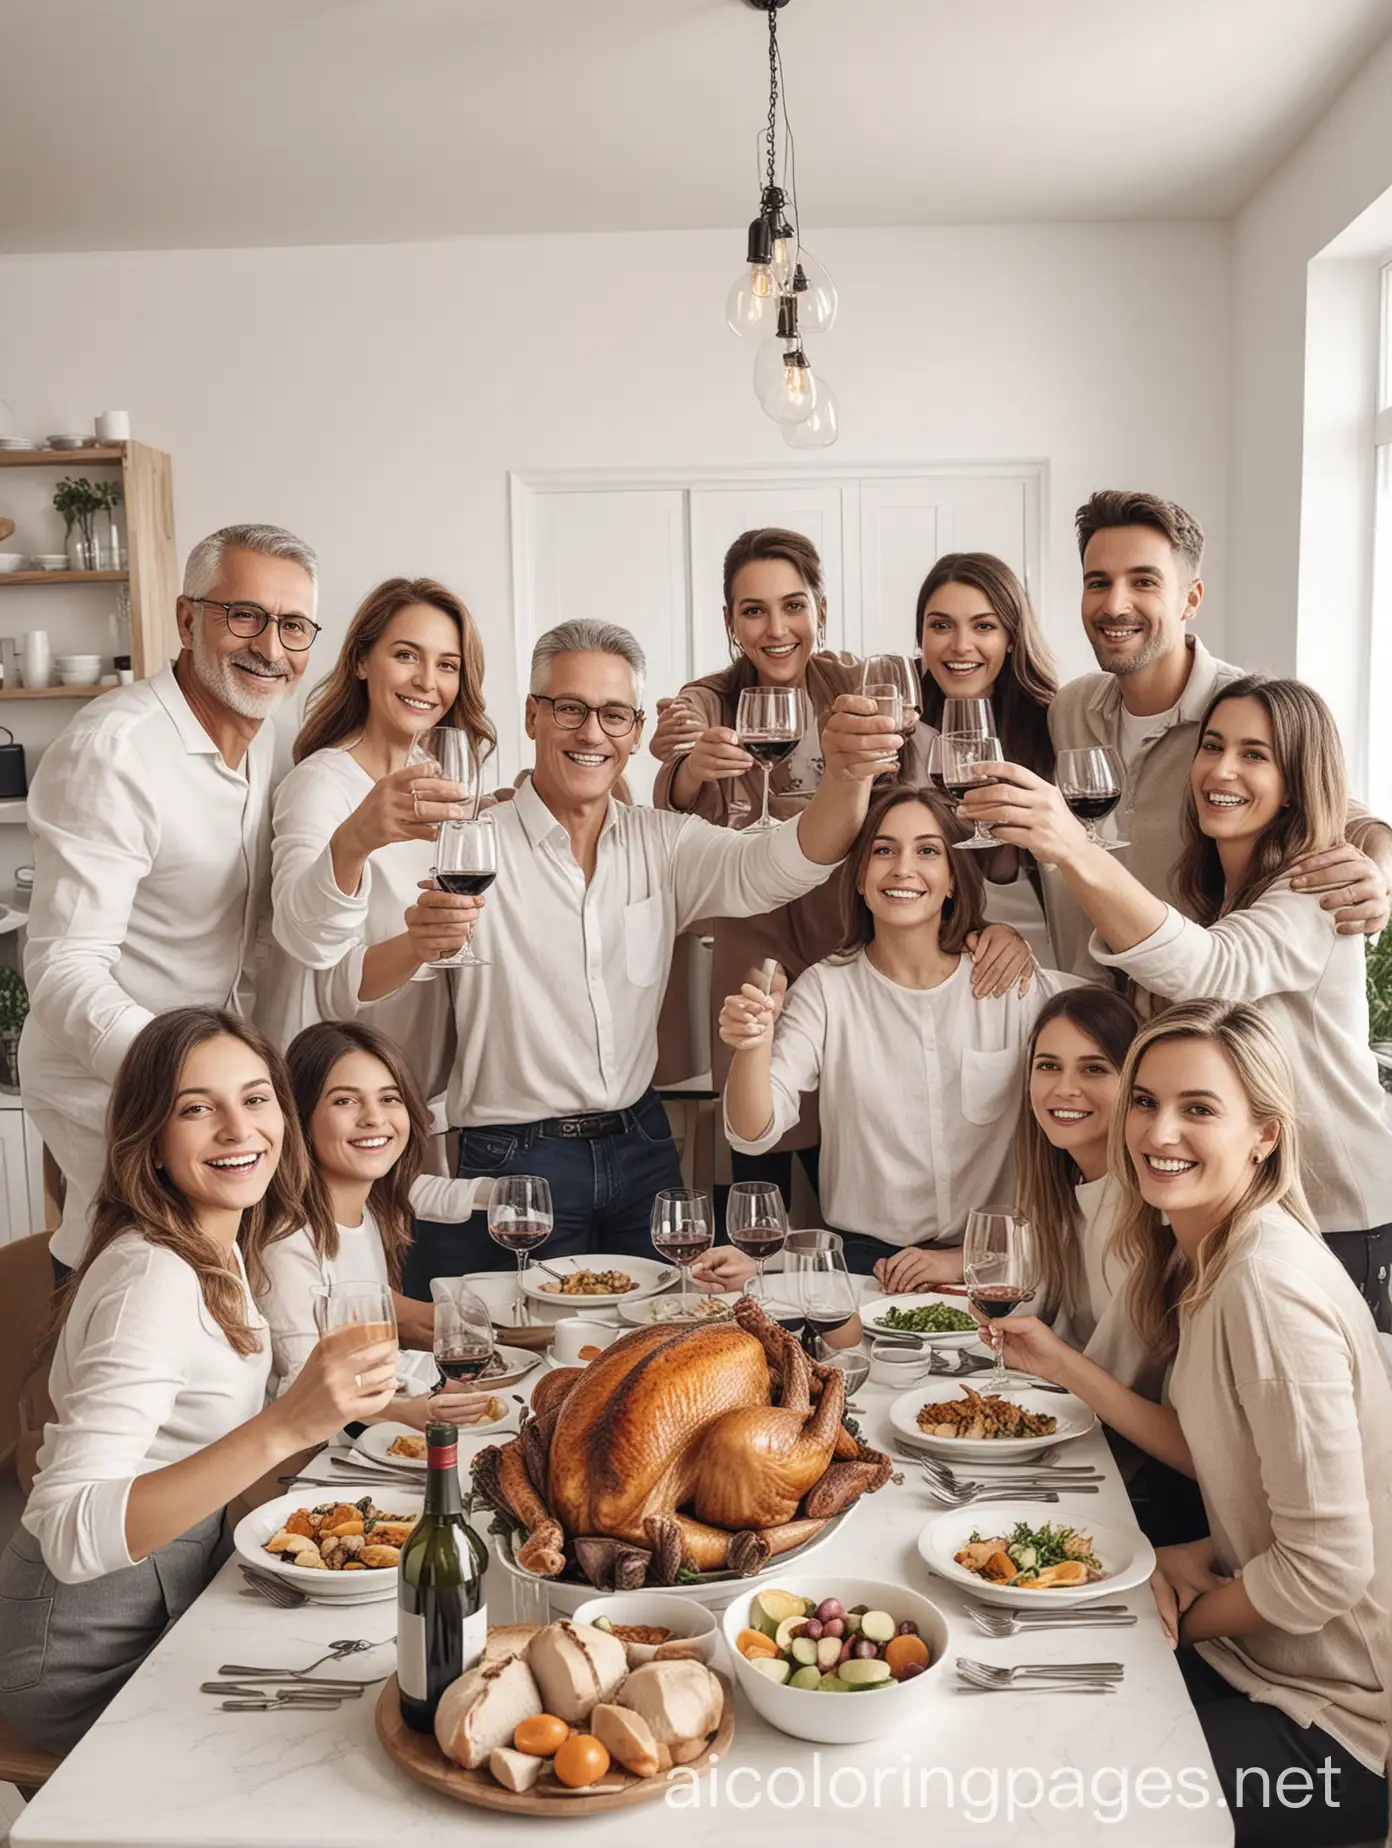 Photo of big family sit feast dishes table around roasted turkey multi-generation relatives making group selfies raising wine glasses juice in living room indoors, Coloring Page, black and white, line art, white background, Simplicity, Ample White Space. The background of the coloring page is plain white to make it easy for young children to color within the lines. The outlines of all the subjects are easy to distinguish, making it simple for kids to color without too much difficulty